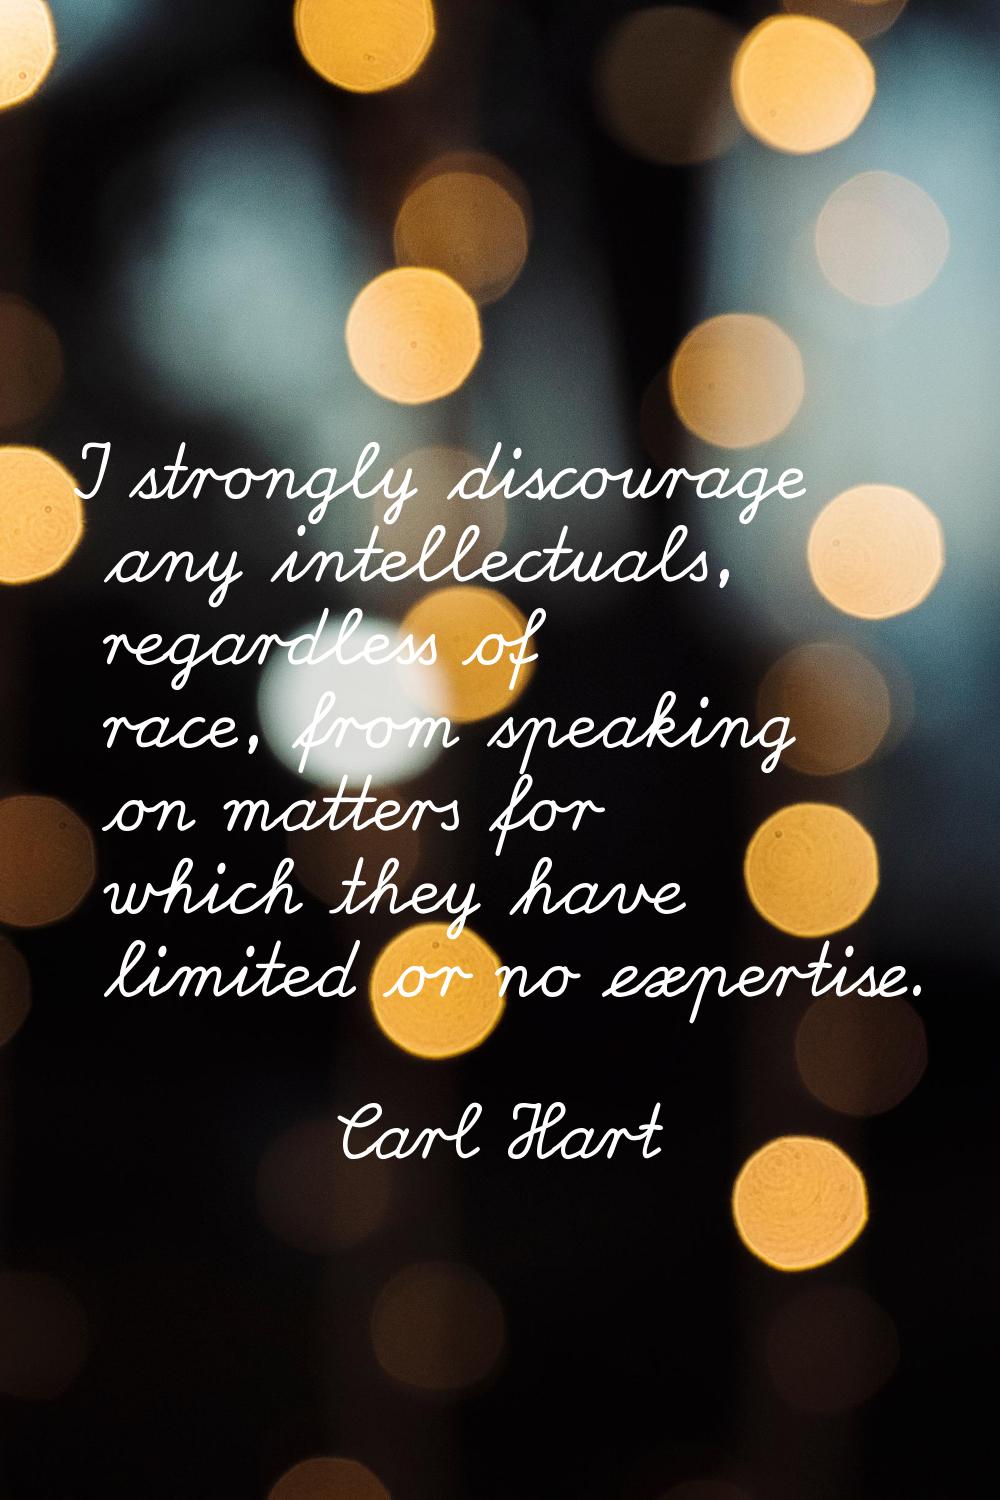 I strongly discourage any intellectuals, regardless of race, from speaking on matters for which the